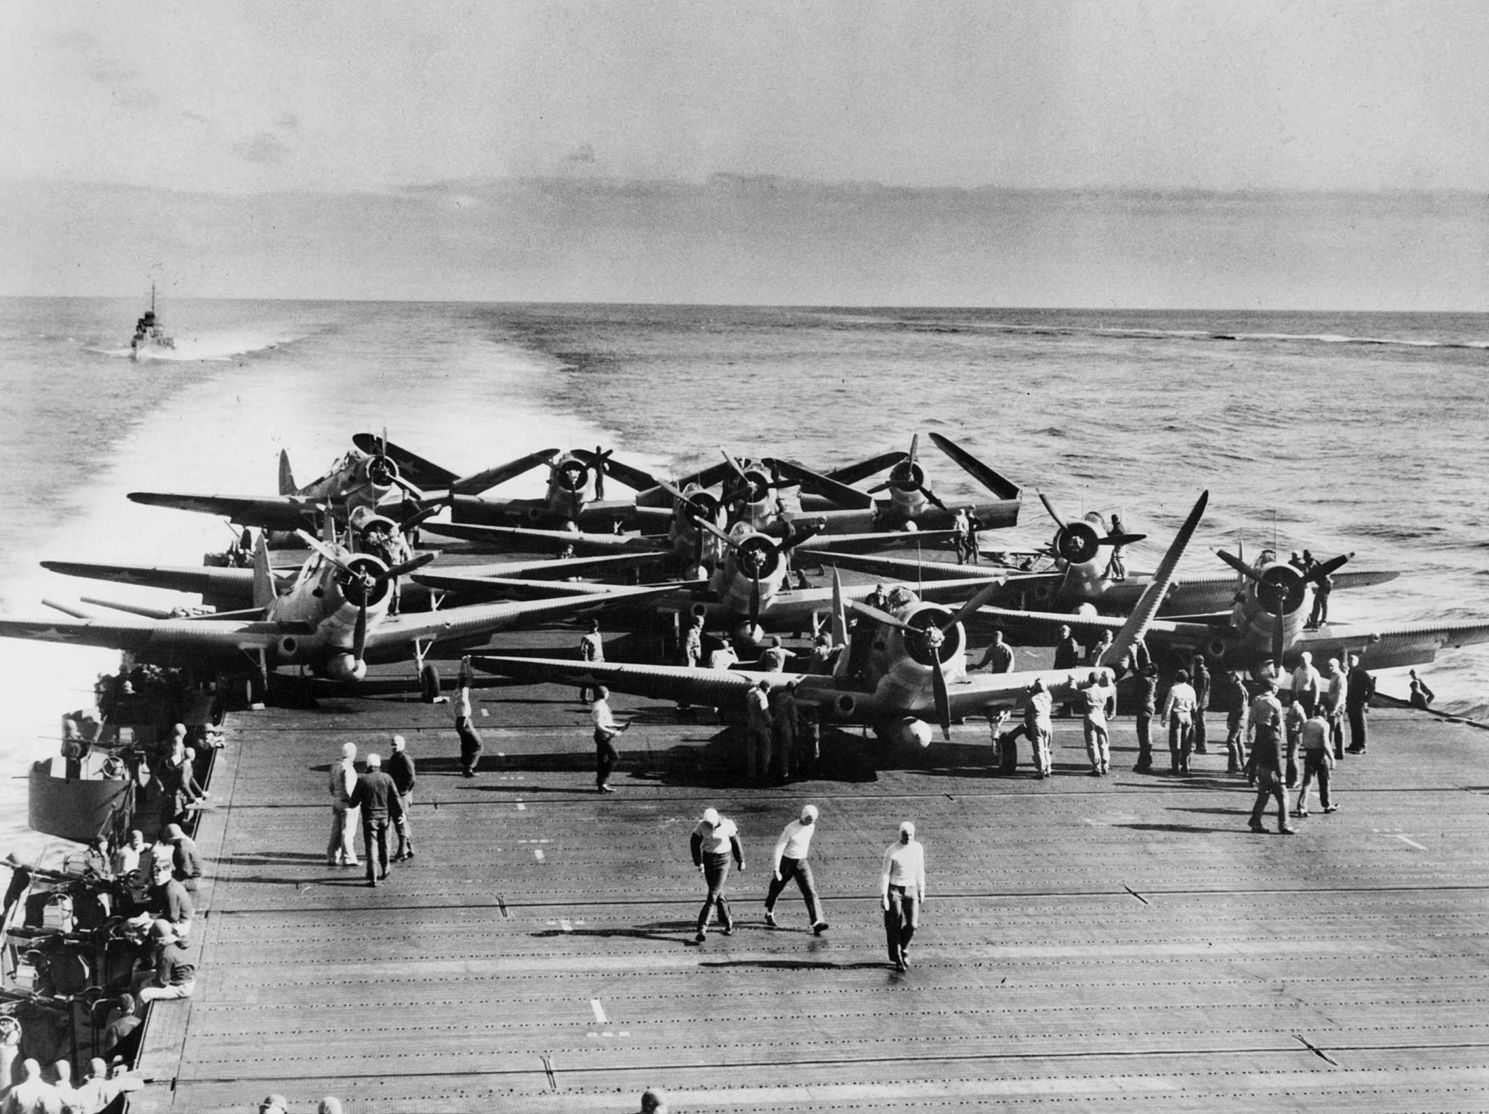 TBD-1 aircraft from Torpedo Squadron 6 prepare for launching on USS Enterprise at 7:40 am on June 4, 1942. Nine squadron aircraft were lost in bombing runs that morning.